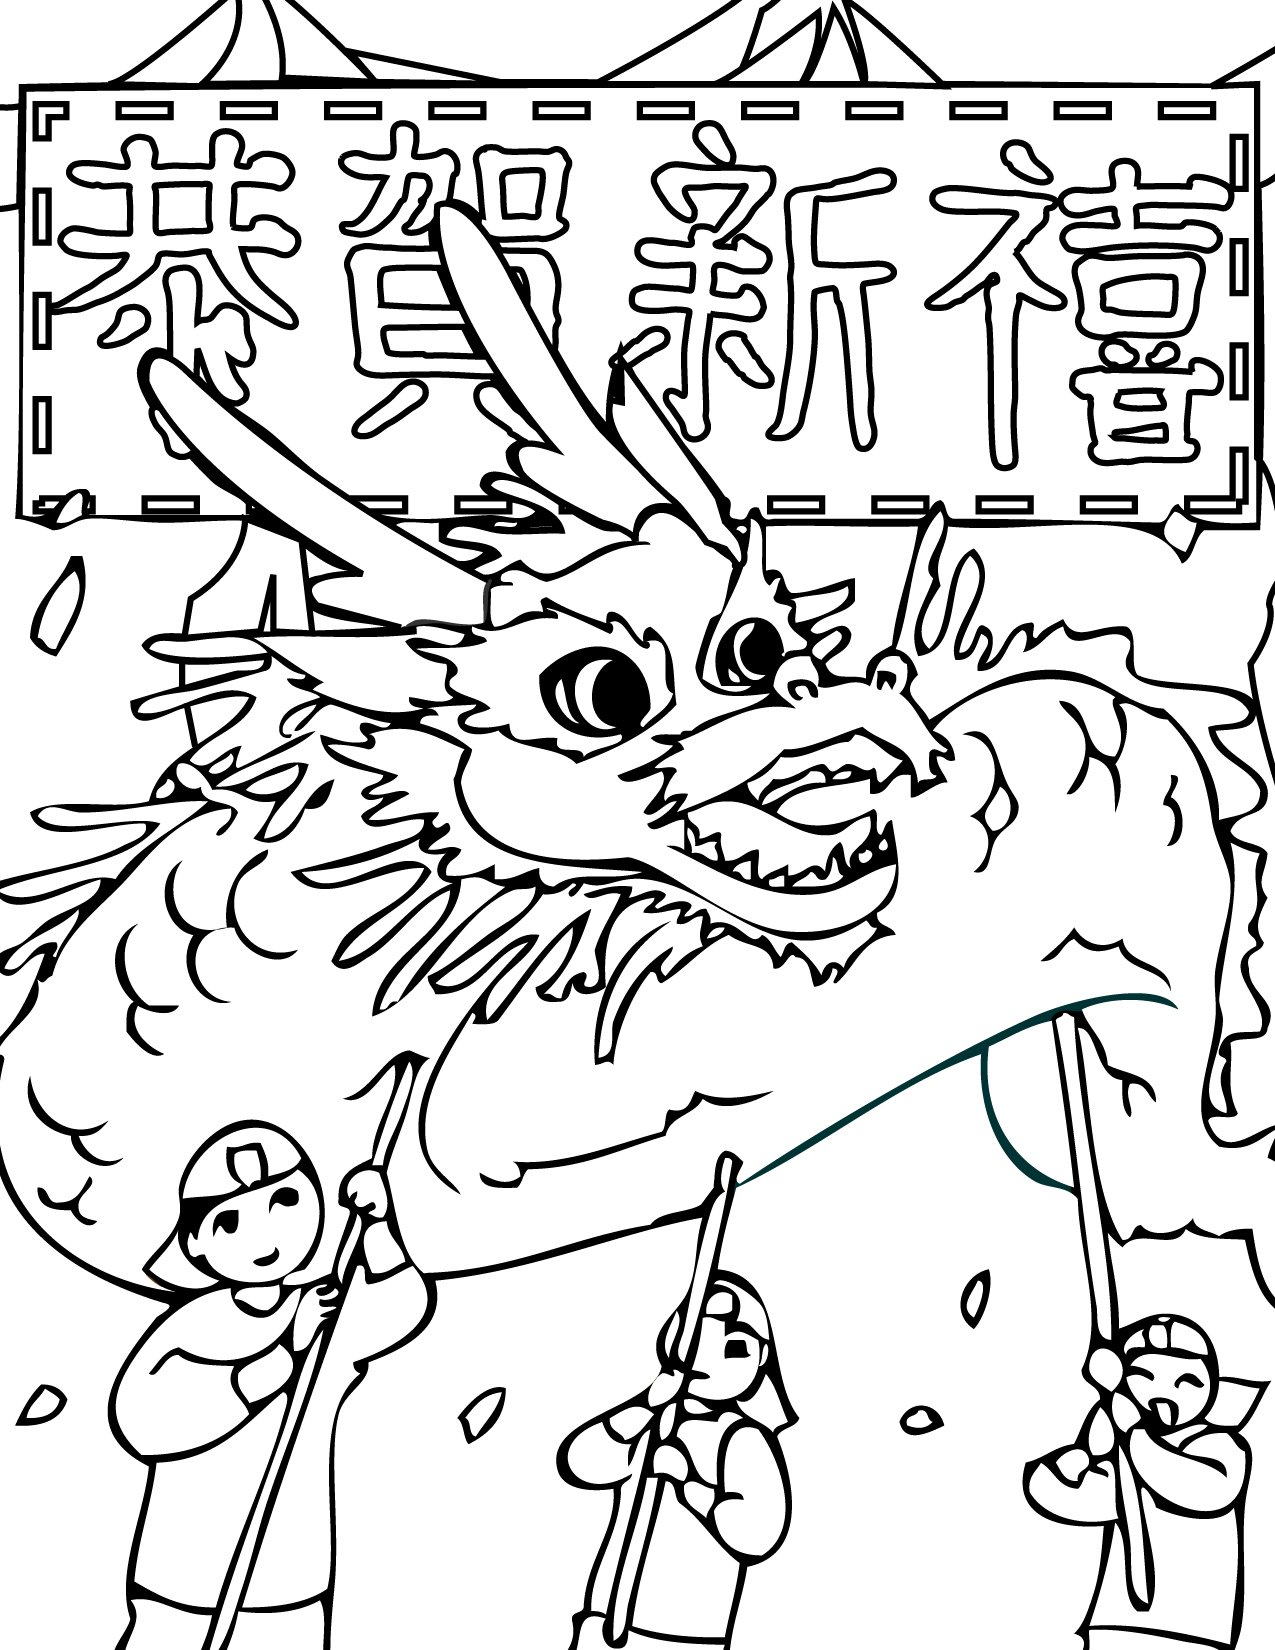 Chinese new year coloring pages to download and print for free